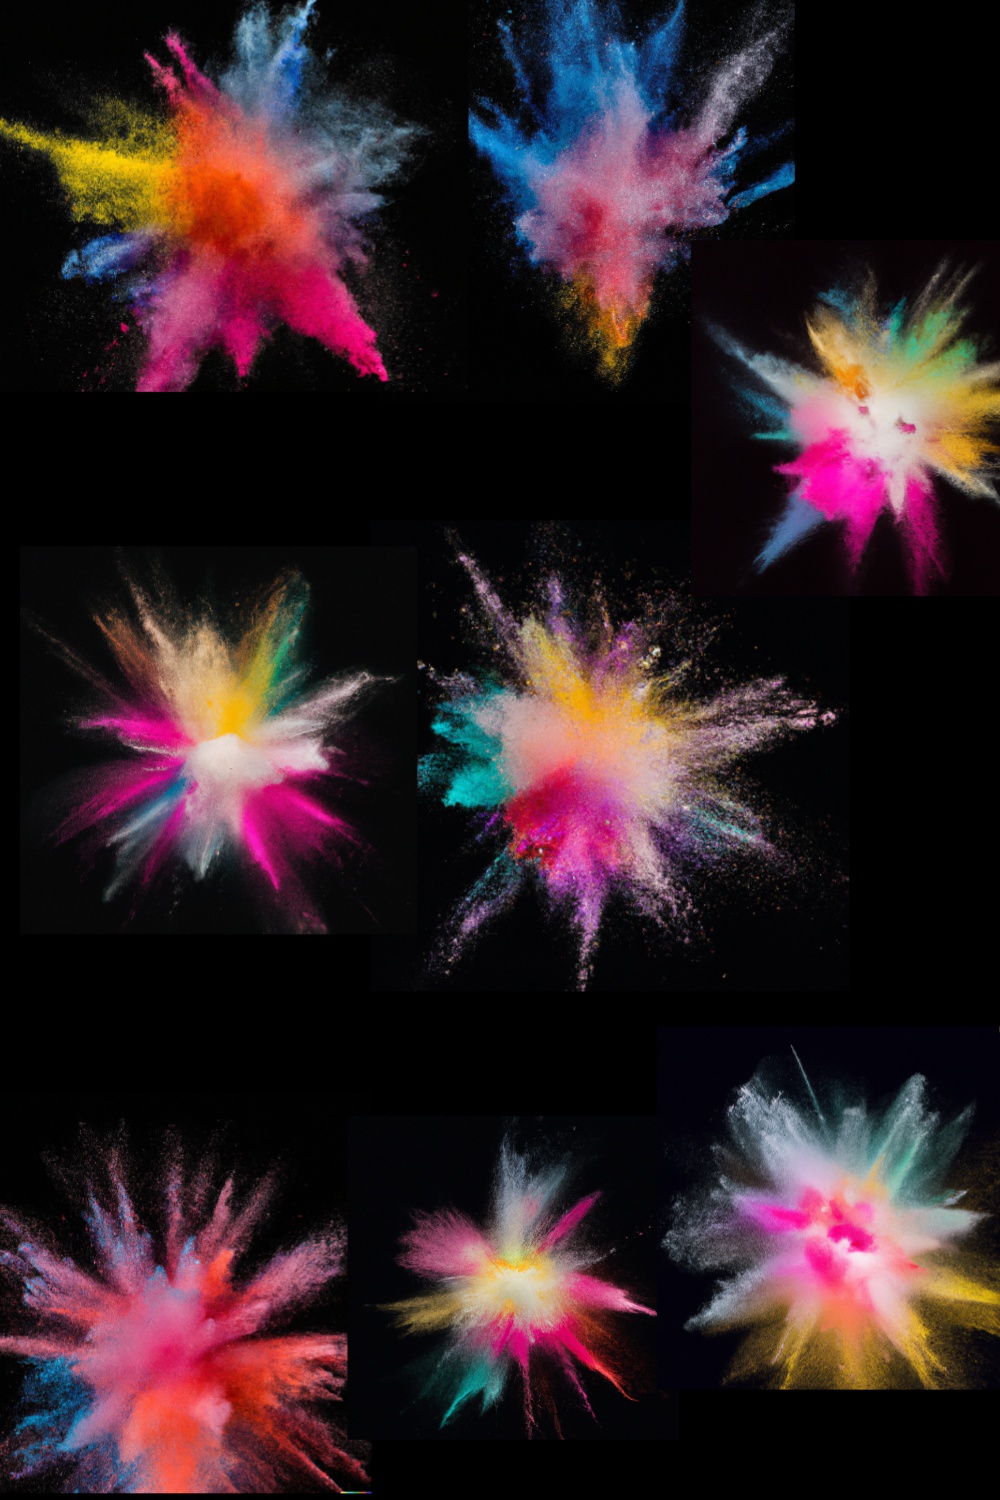 A centered explosion of colorful powder on a black background pinterest preview image.